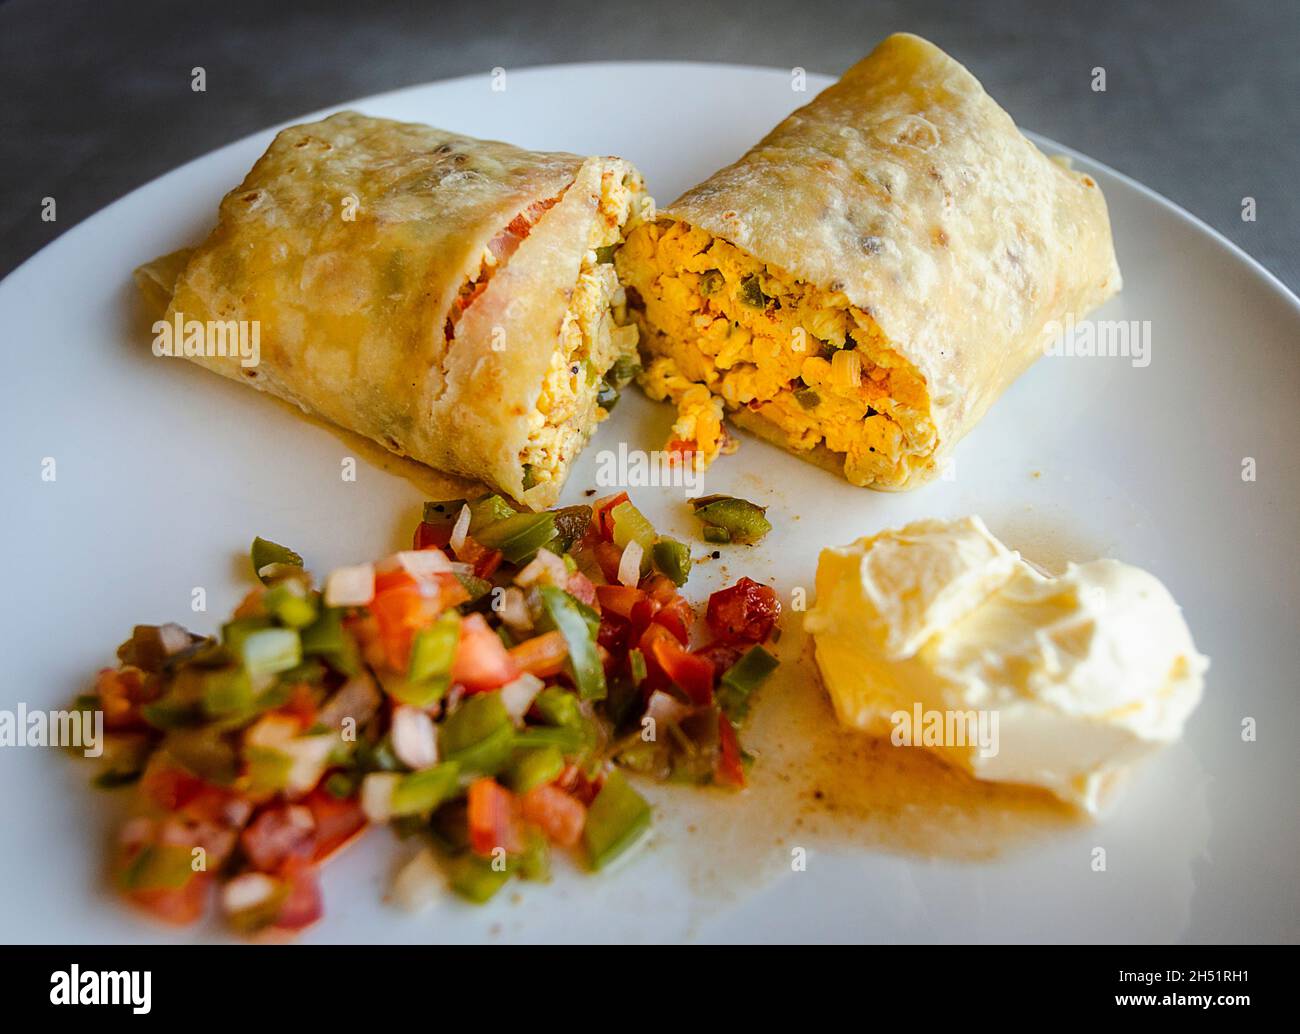 Western international  food as served in SE Asia. Stock Photo